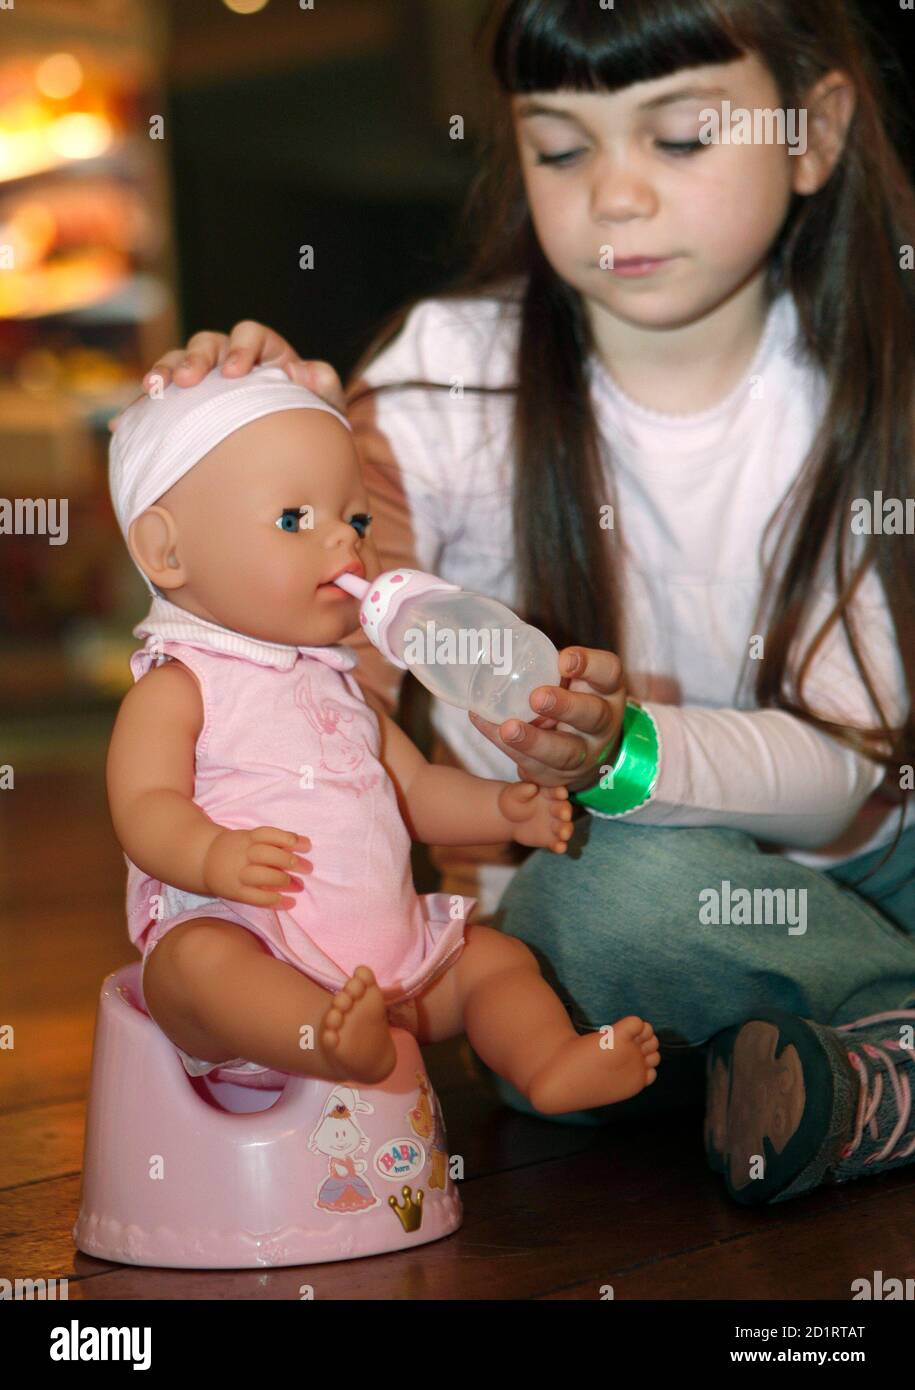 A girl poses with the "BABY born with Magic Potty" toy at the Dream Toys  exhibition in London October 15, 2008. The Toy Retailers Association  predicts the toy to be one of